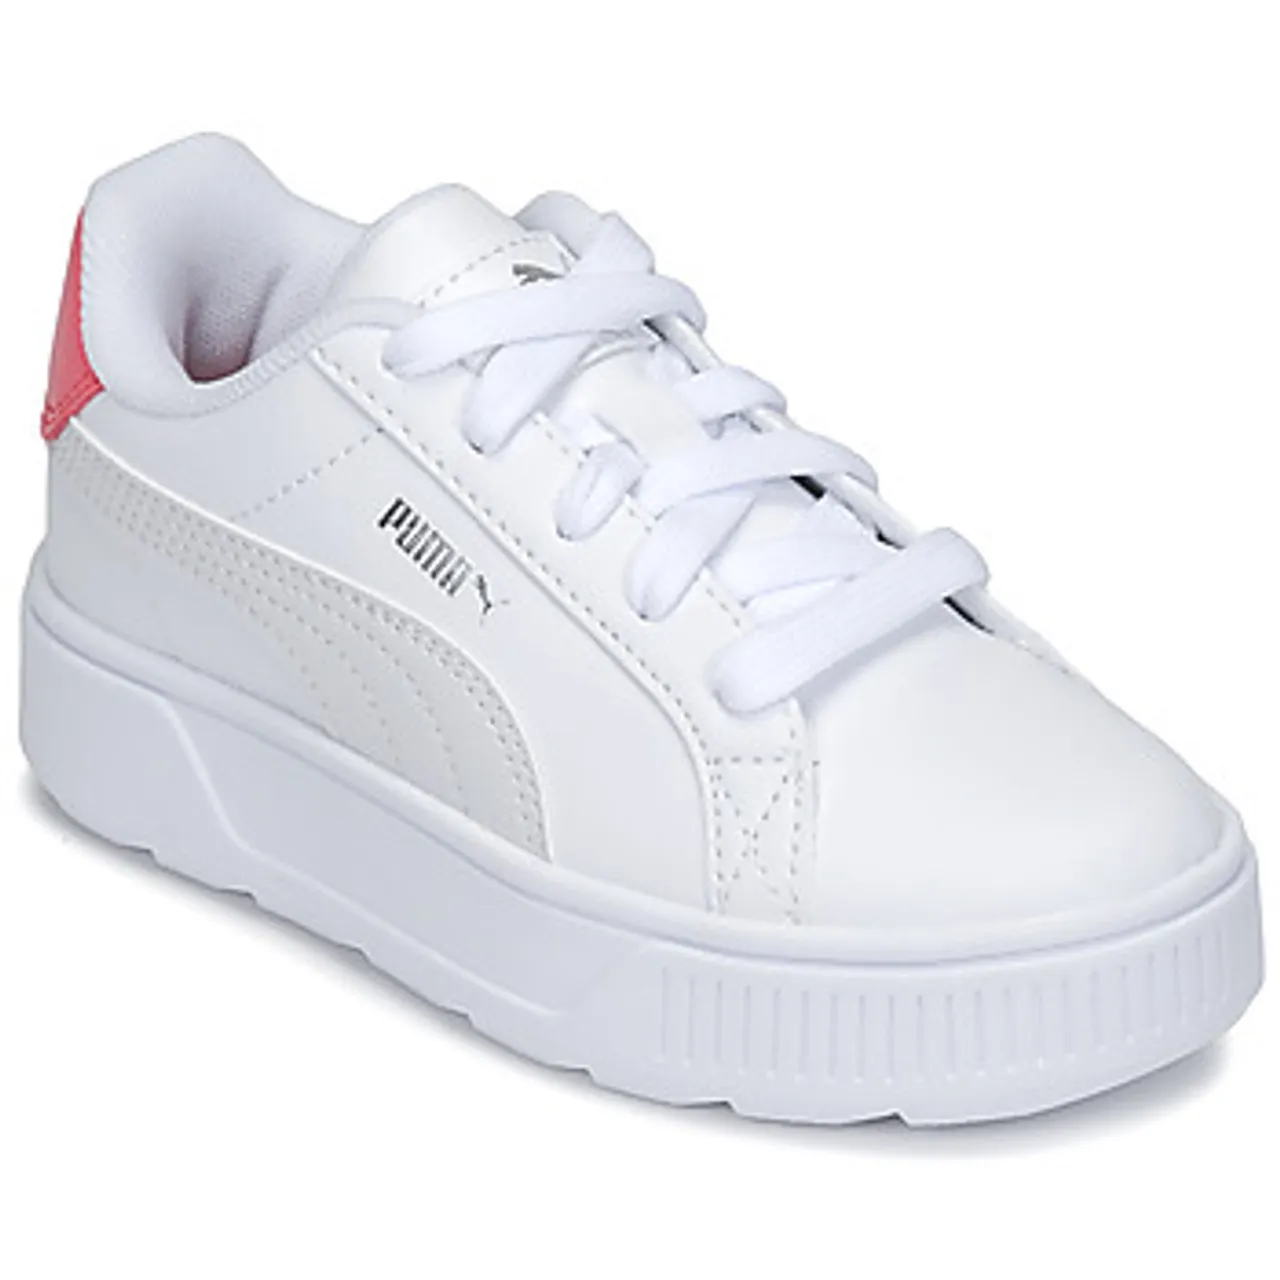 Puma  PS KARMEN L  girls's Children's Shoes (Trainers) in White